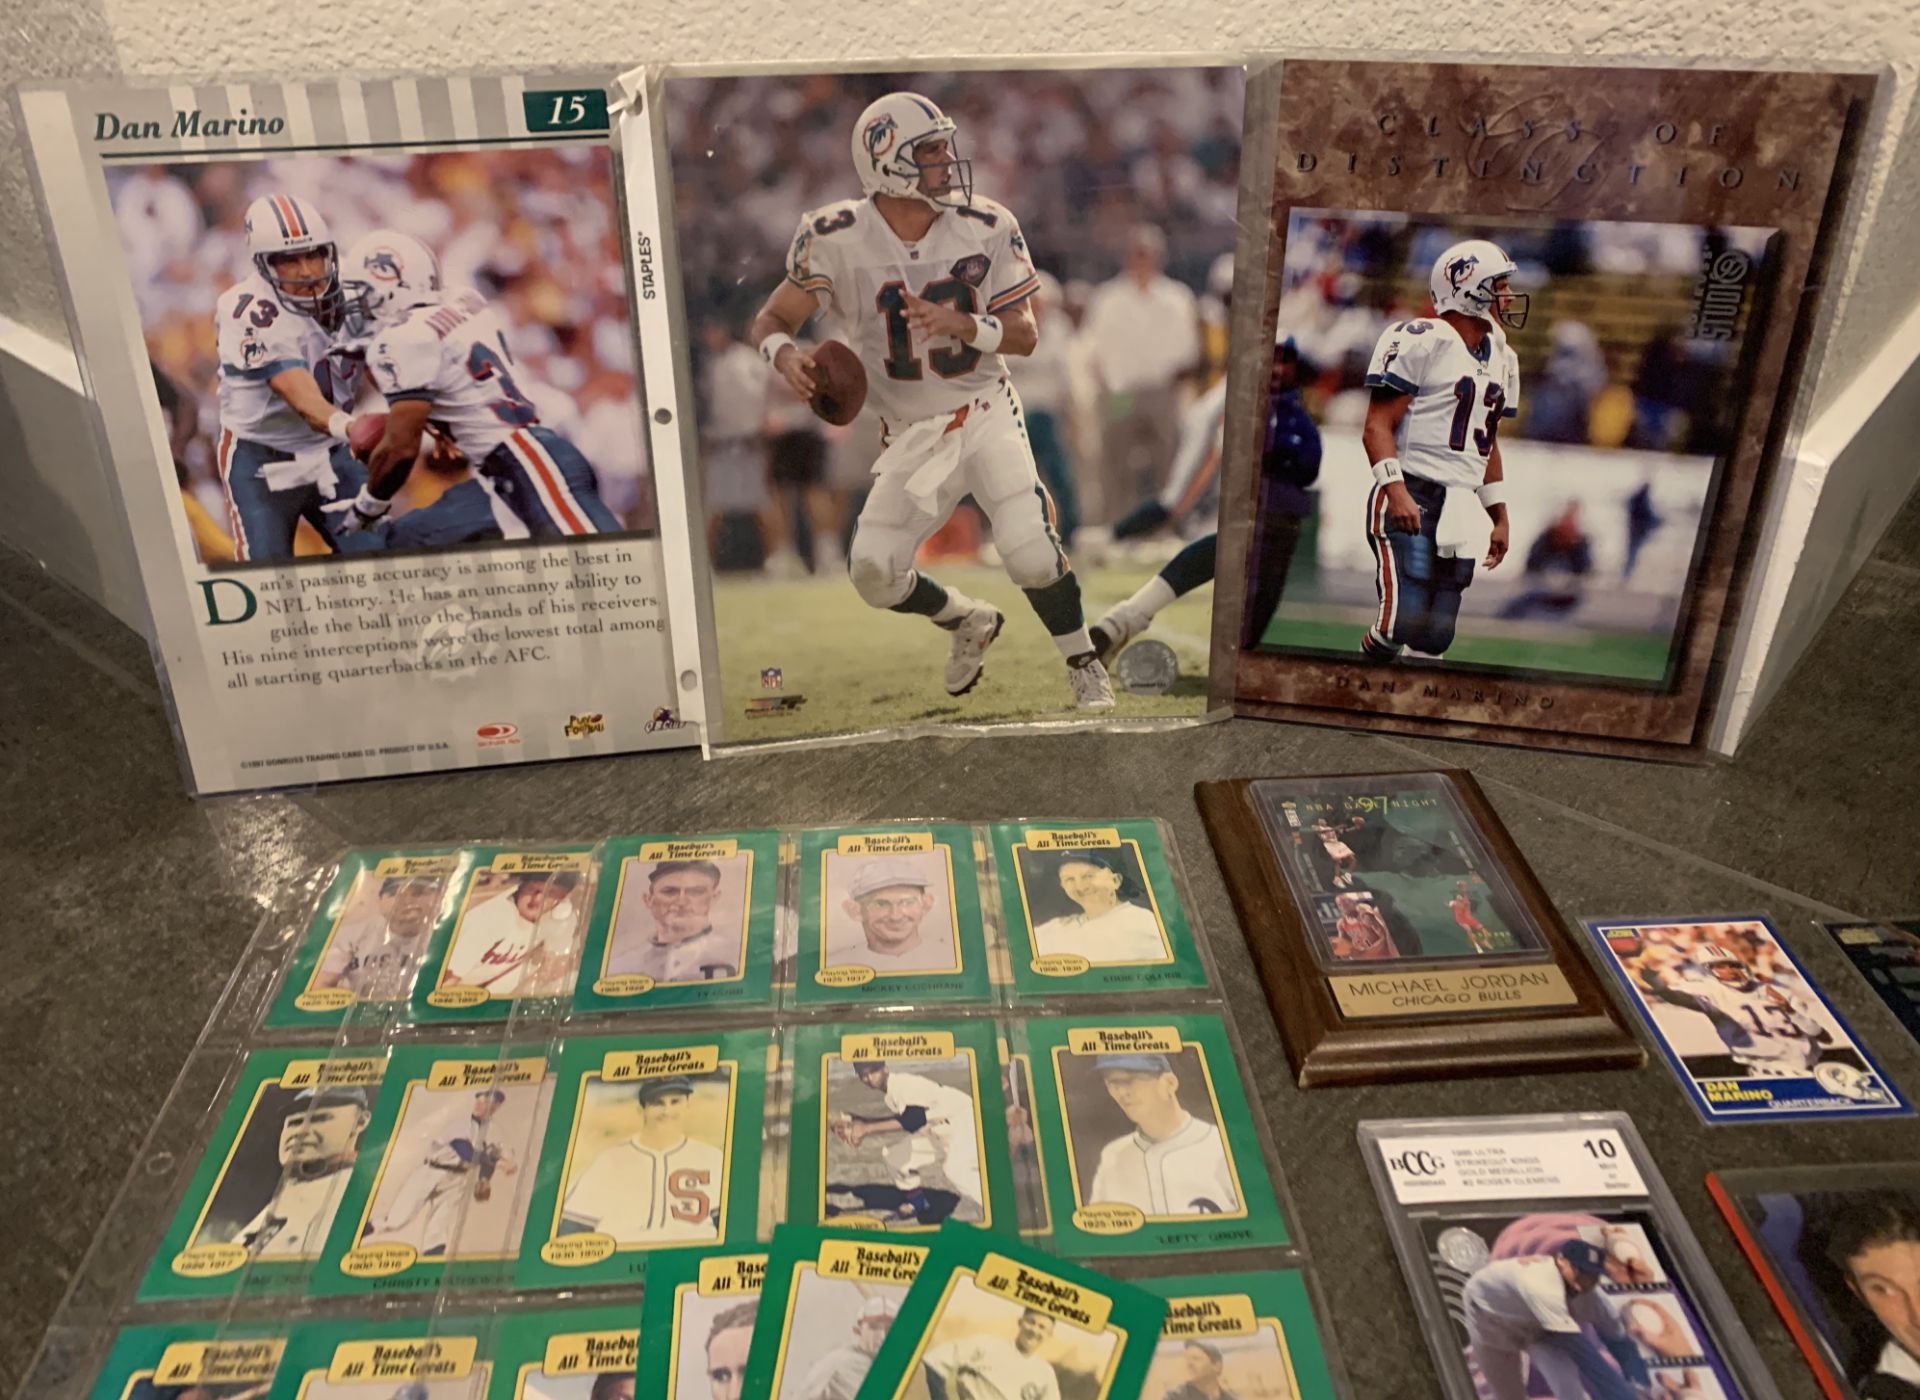 LOTS OF SOME VERY RARE COLLECTIBLE ITEMS AND CARDS DAN MARINO, WAYNE GRETZKY + MORE - Image 2 of 4